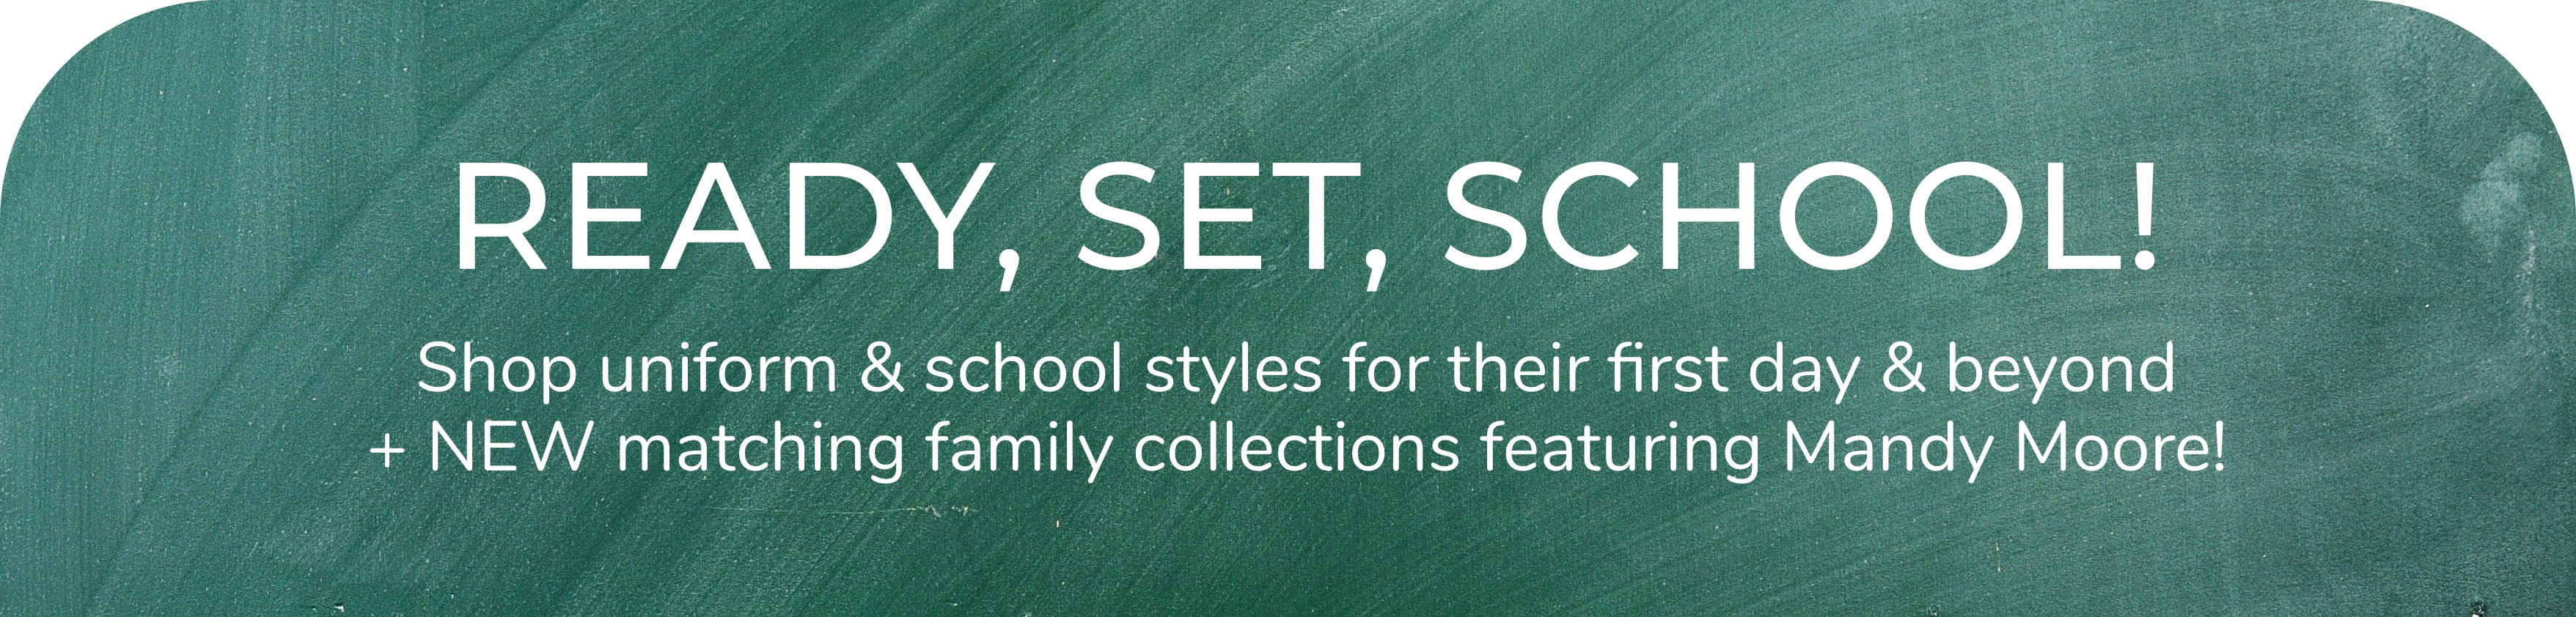 BACK TO SCHOOL: Shop uniform & school styles for
                their first day & beyond!